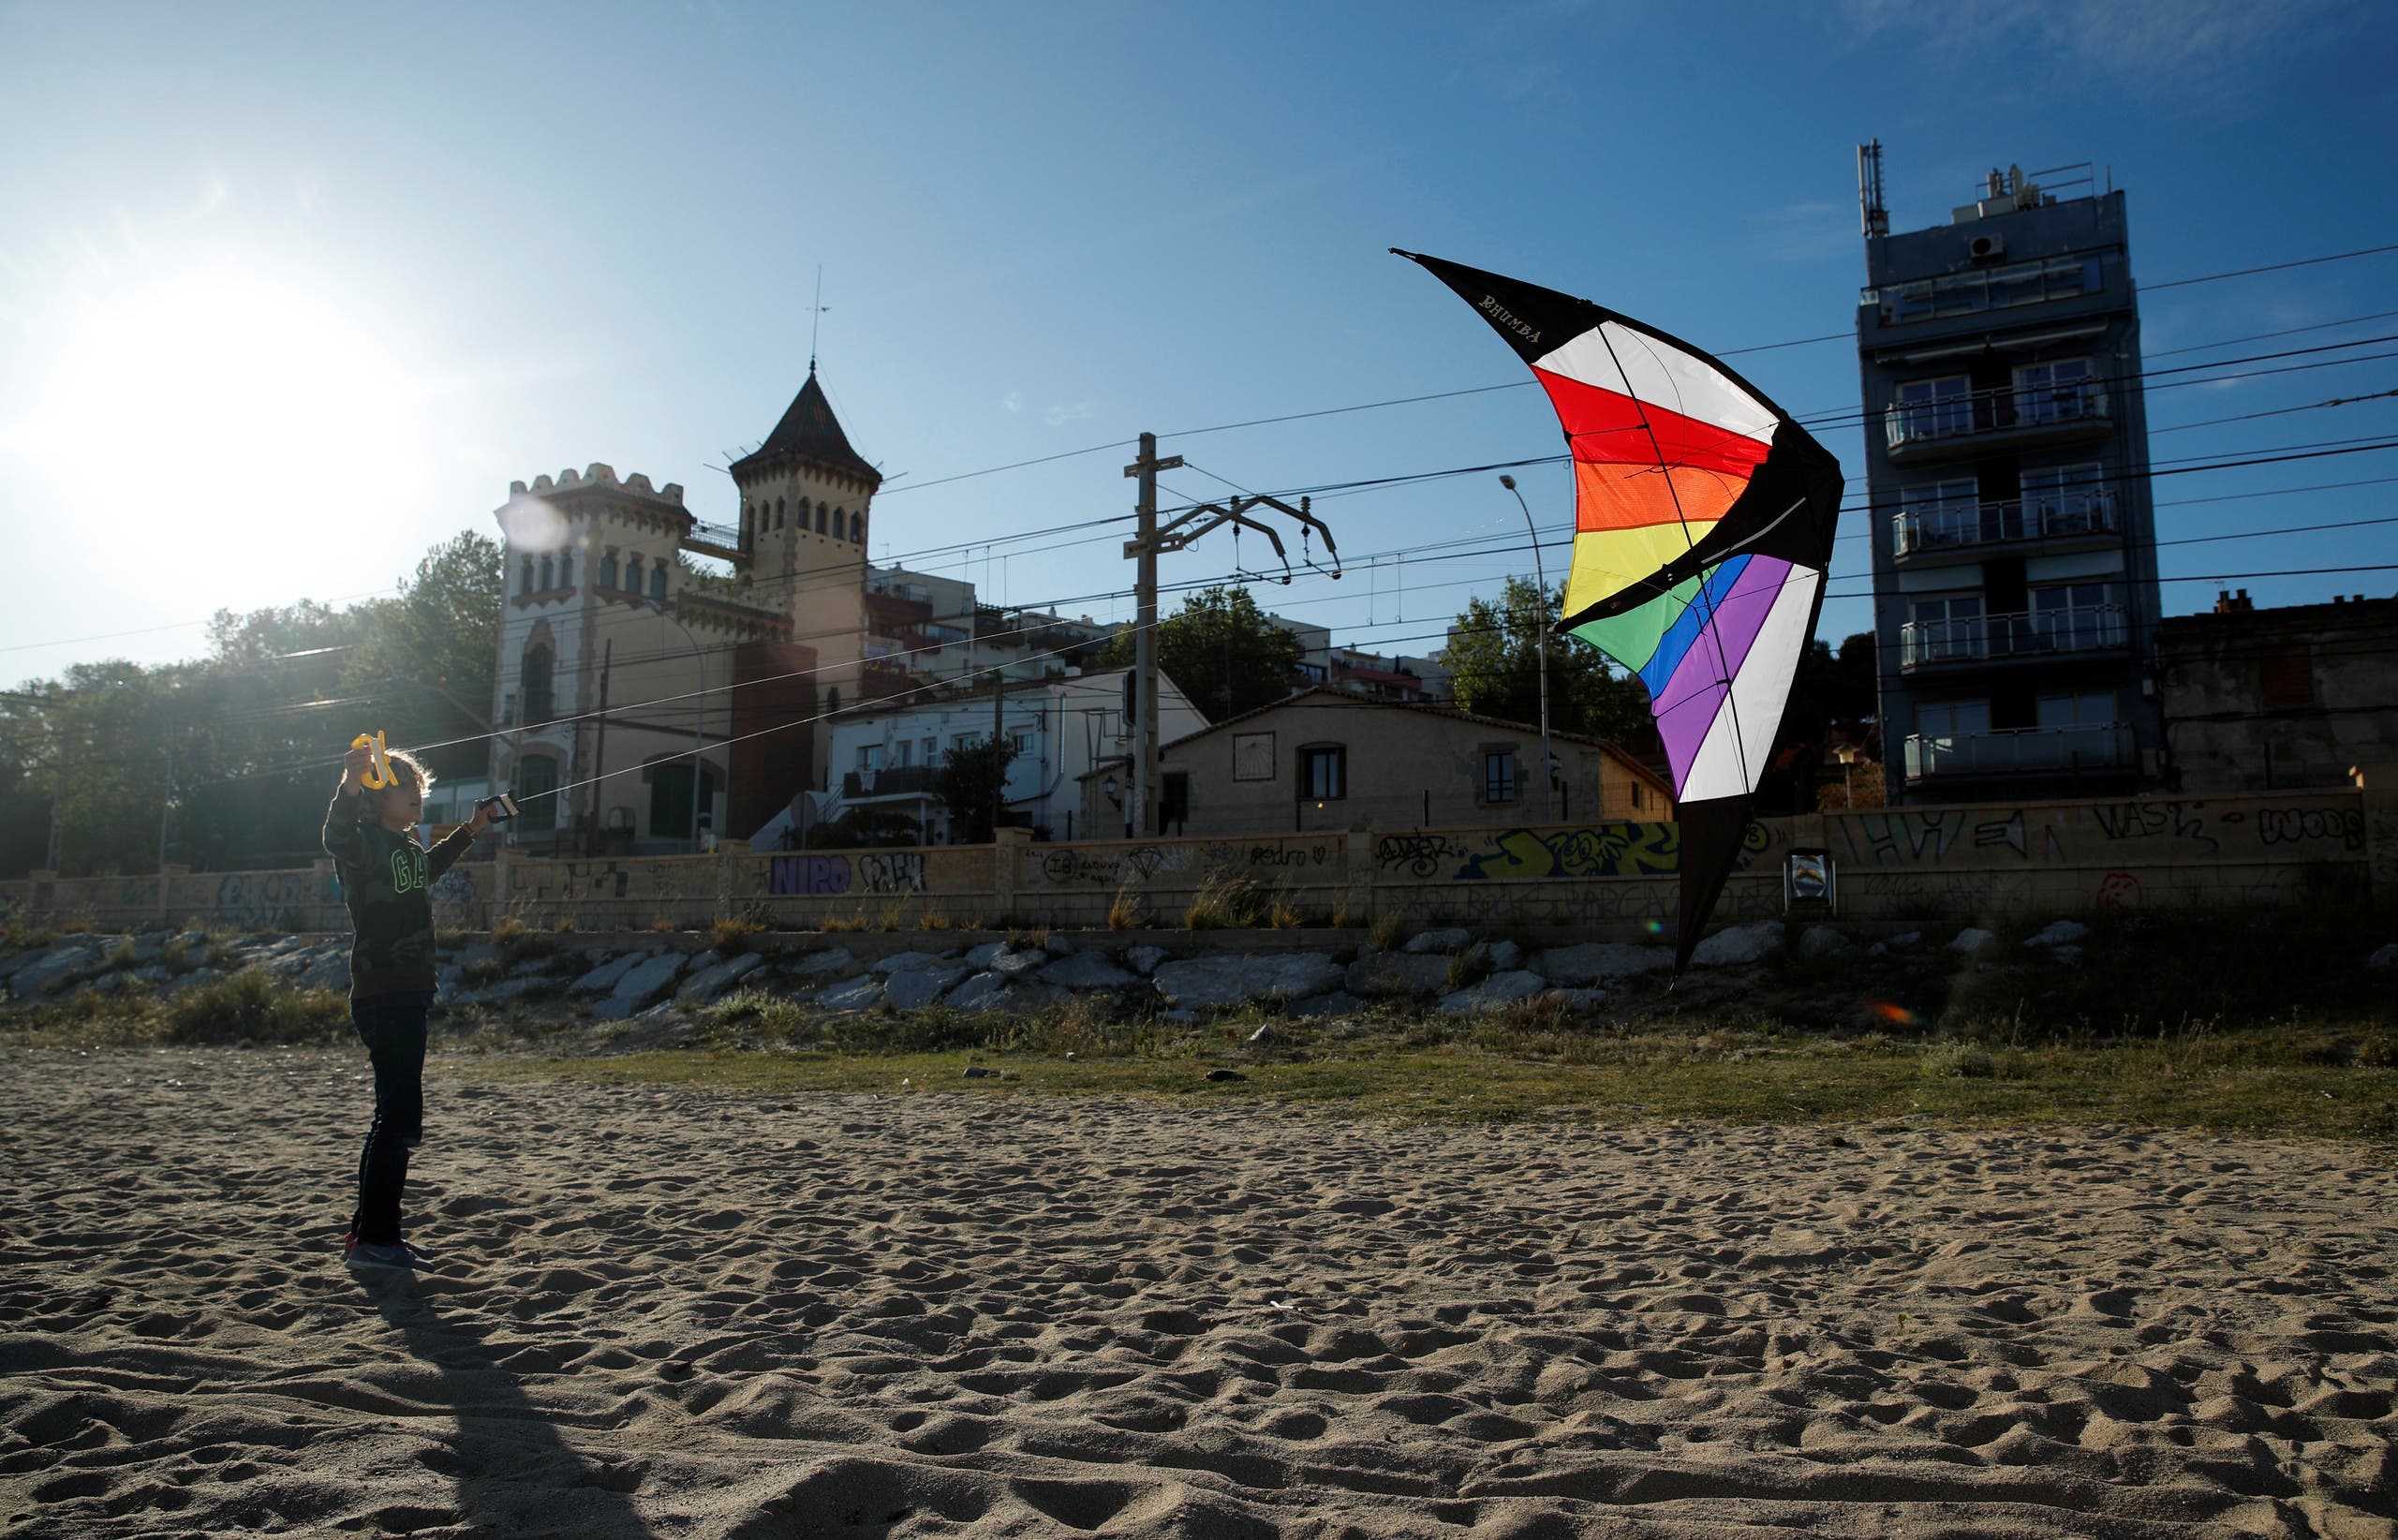 A boy flies a kite on a beach, after restrictions were partially lifted for children, following the coronavirus disease (COVID-19) outbreak in El Masnou, north to Barcelona, Spain, April 29, 2020. (Reuters)